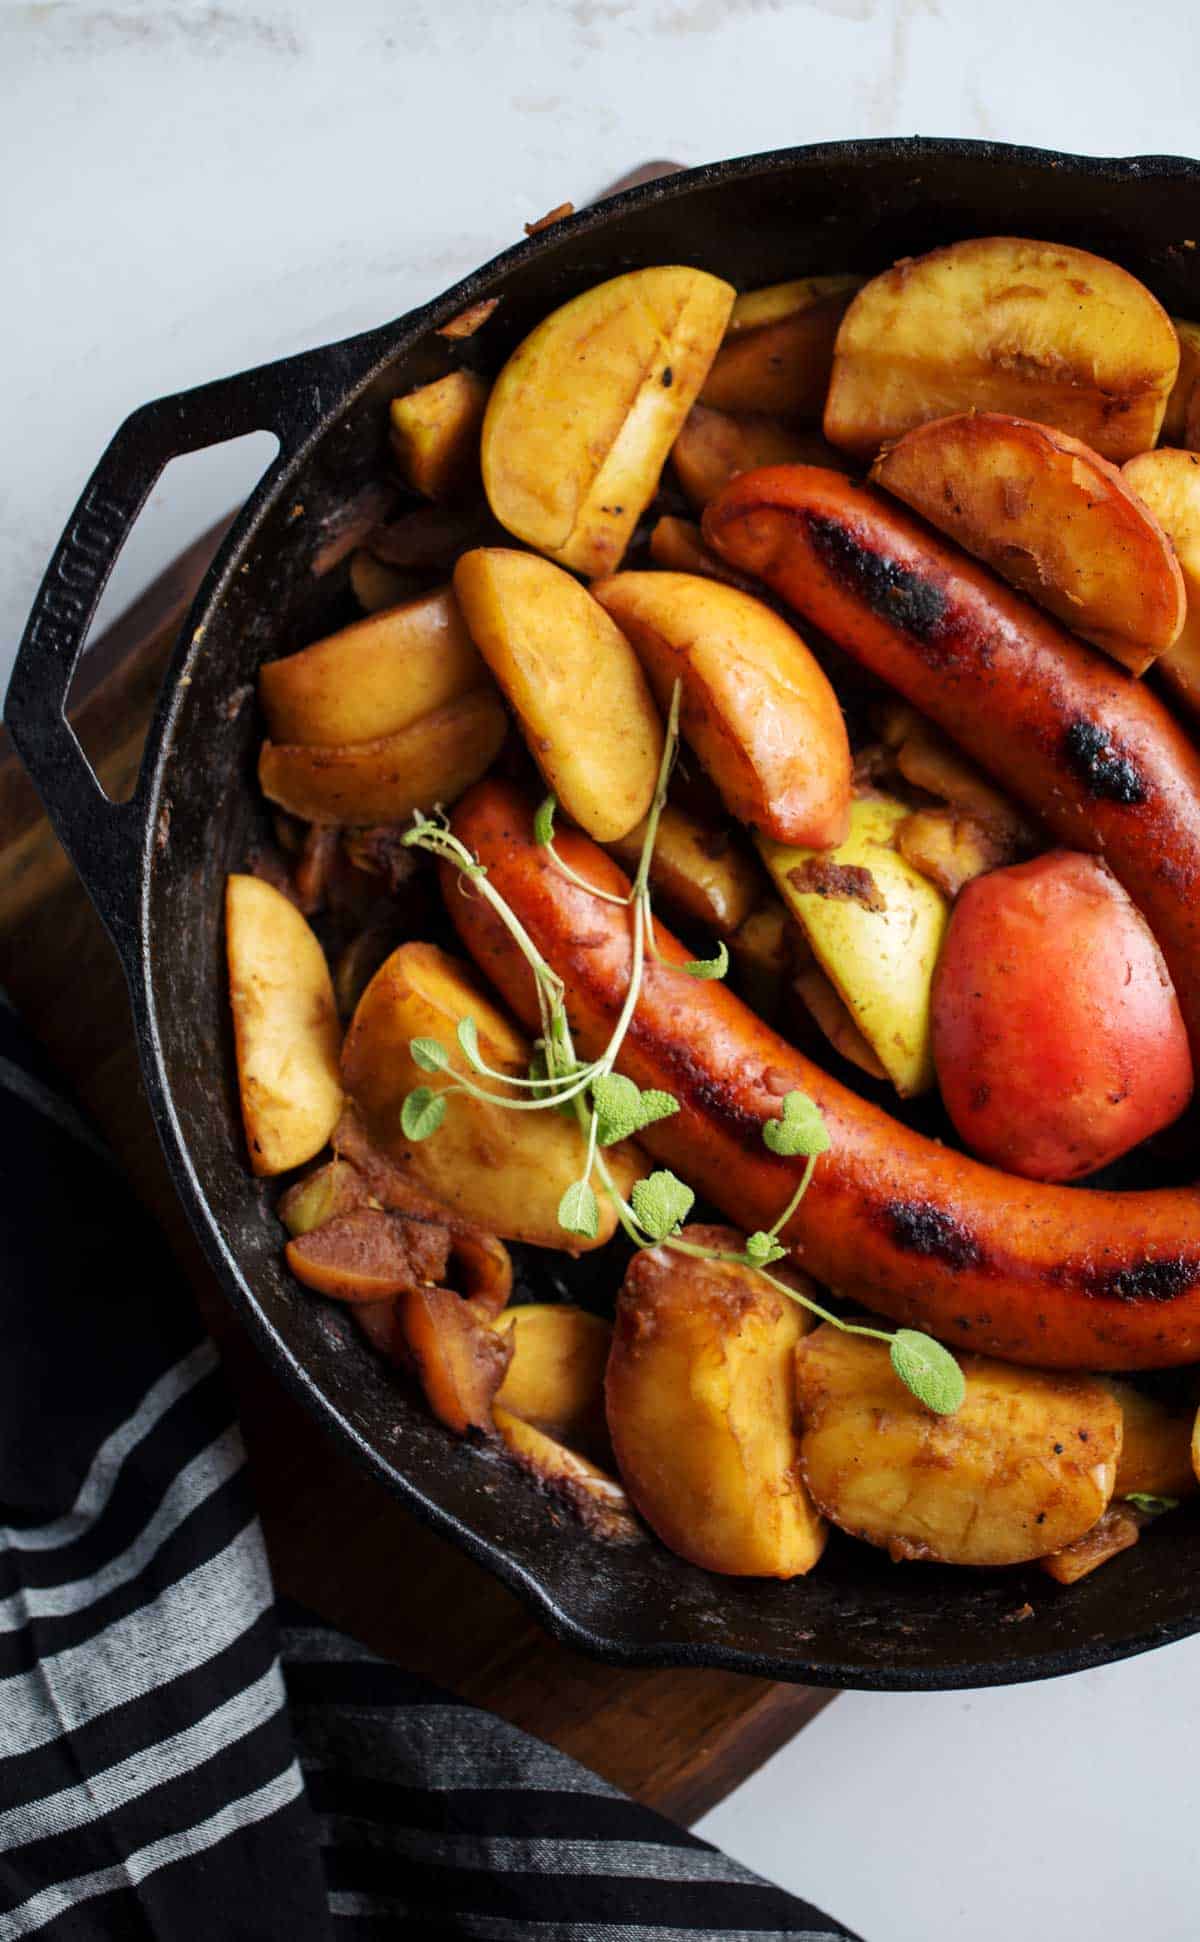 Fried Sausages and Apples